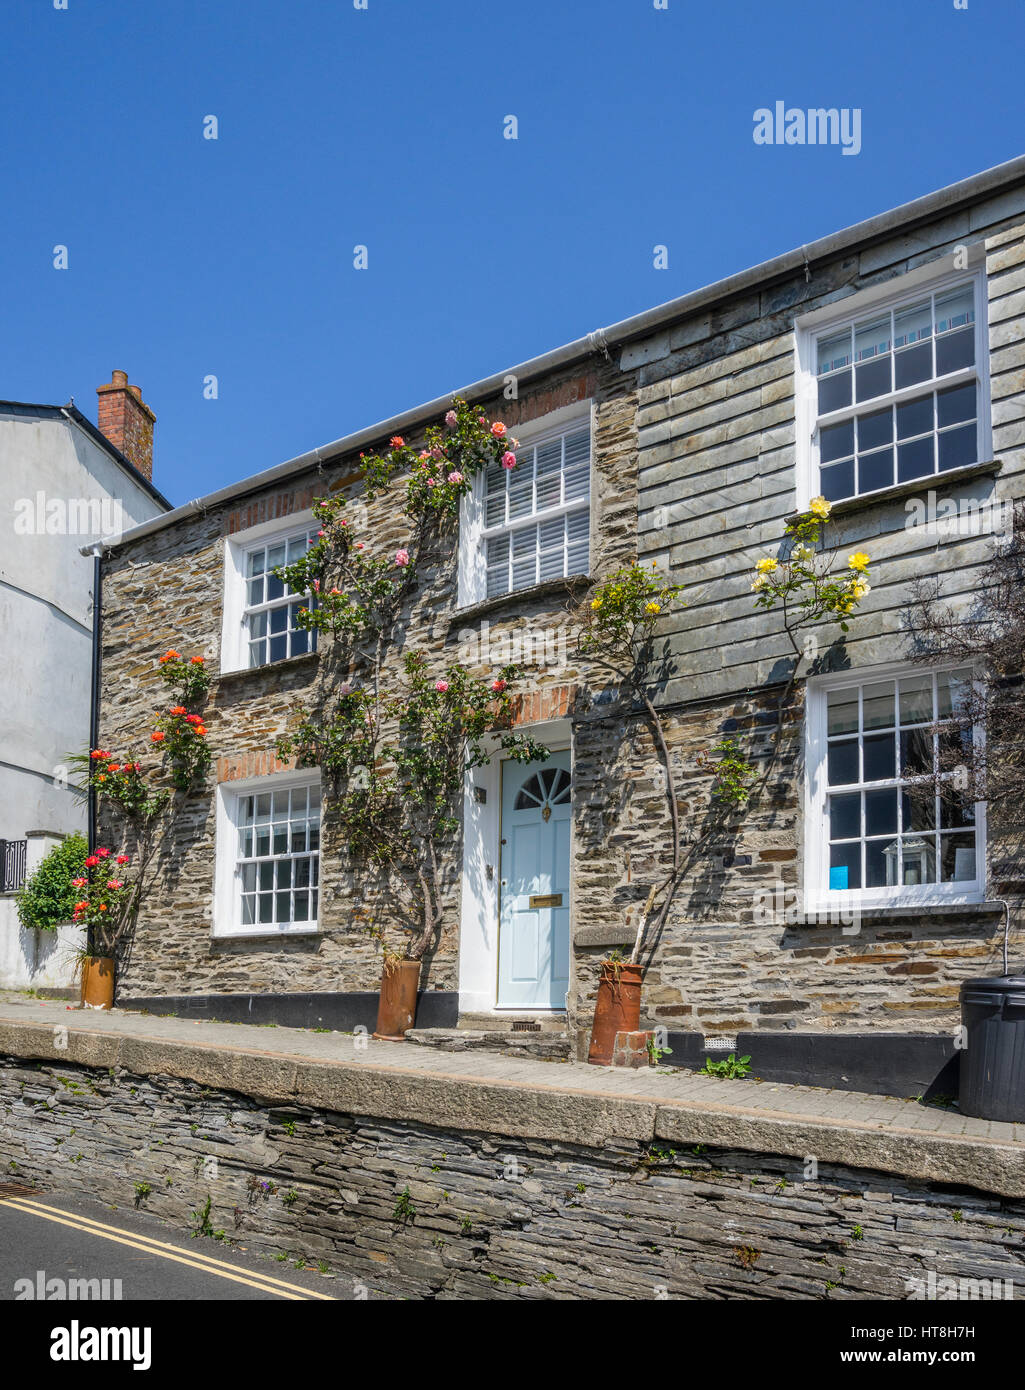 United Kingdom, South West England, Cornwall, Padstow, typical Cornish granite and slate house facade adorned with rose bushes Stock Photo